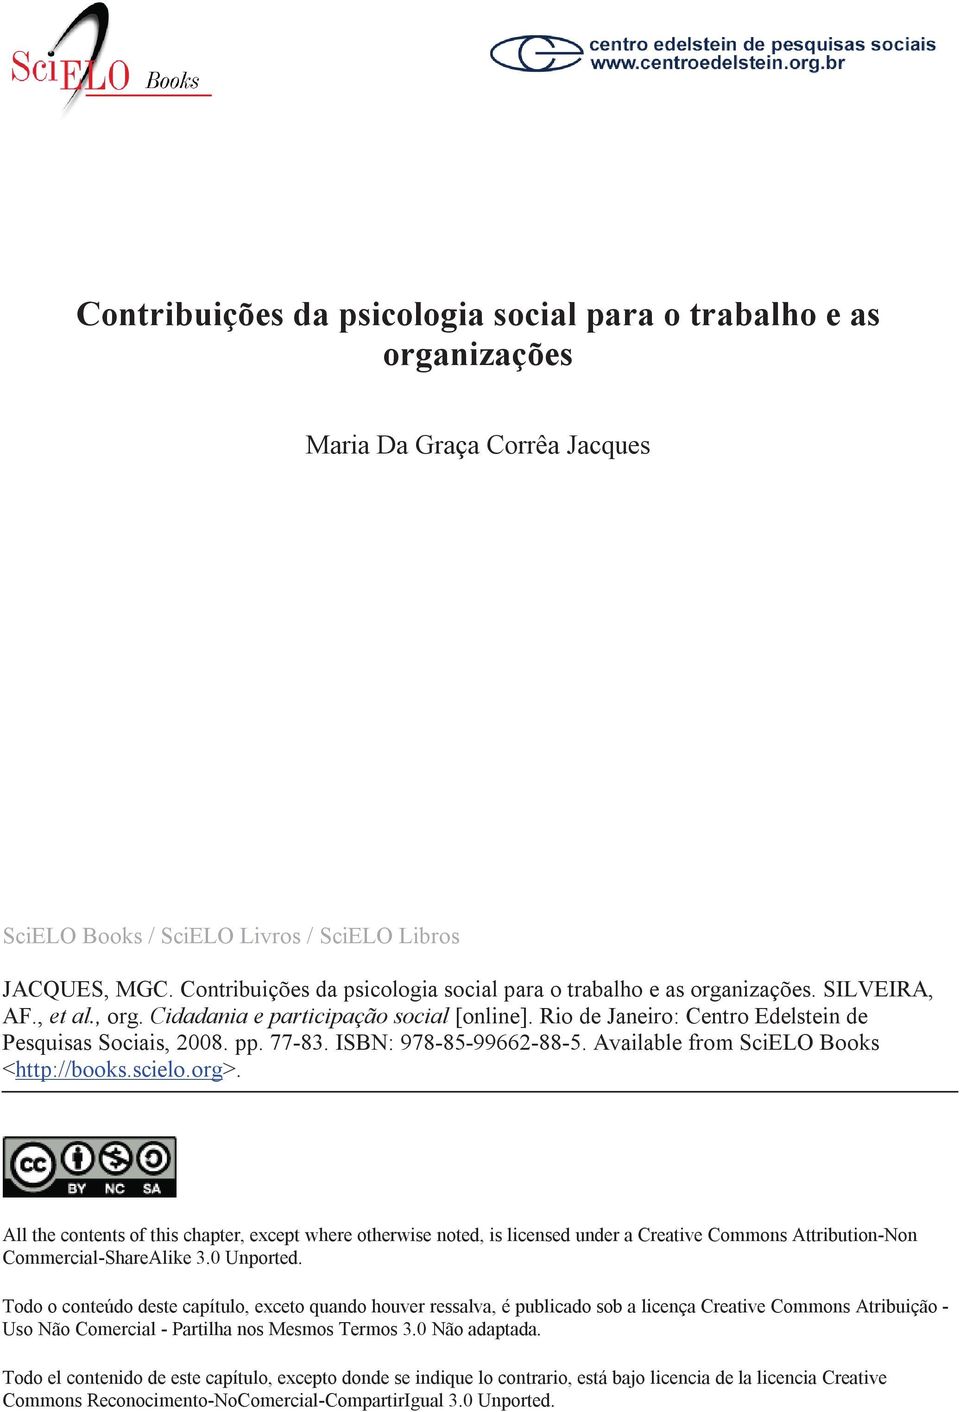 pp. 77-83. ISBN: 978-85-99662-88-5. Available from SciELO Books <http://books.scielo.org>.